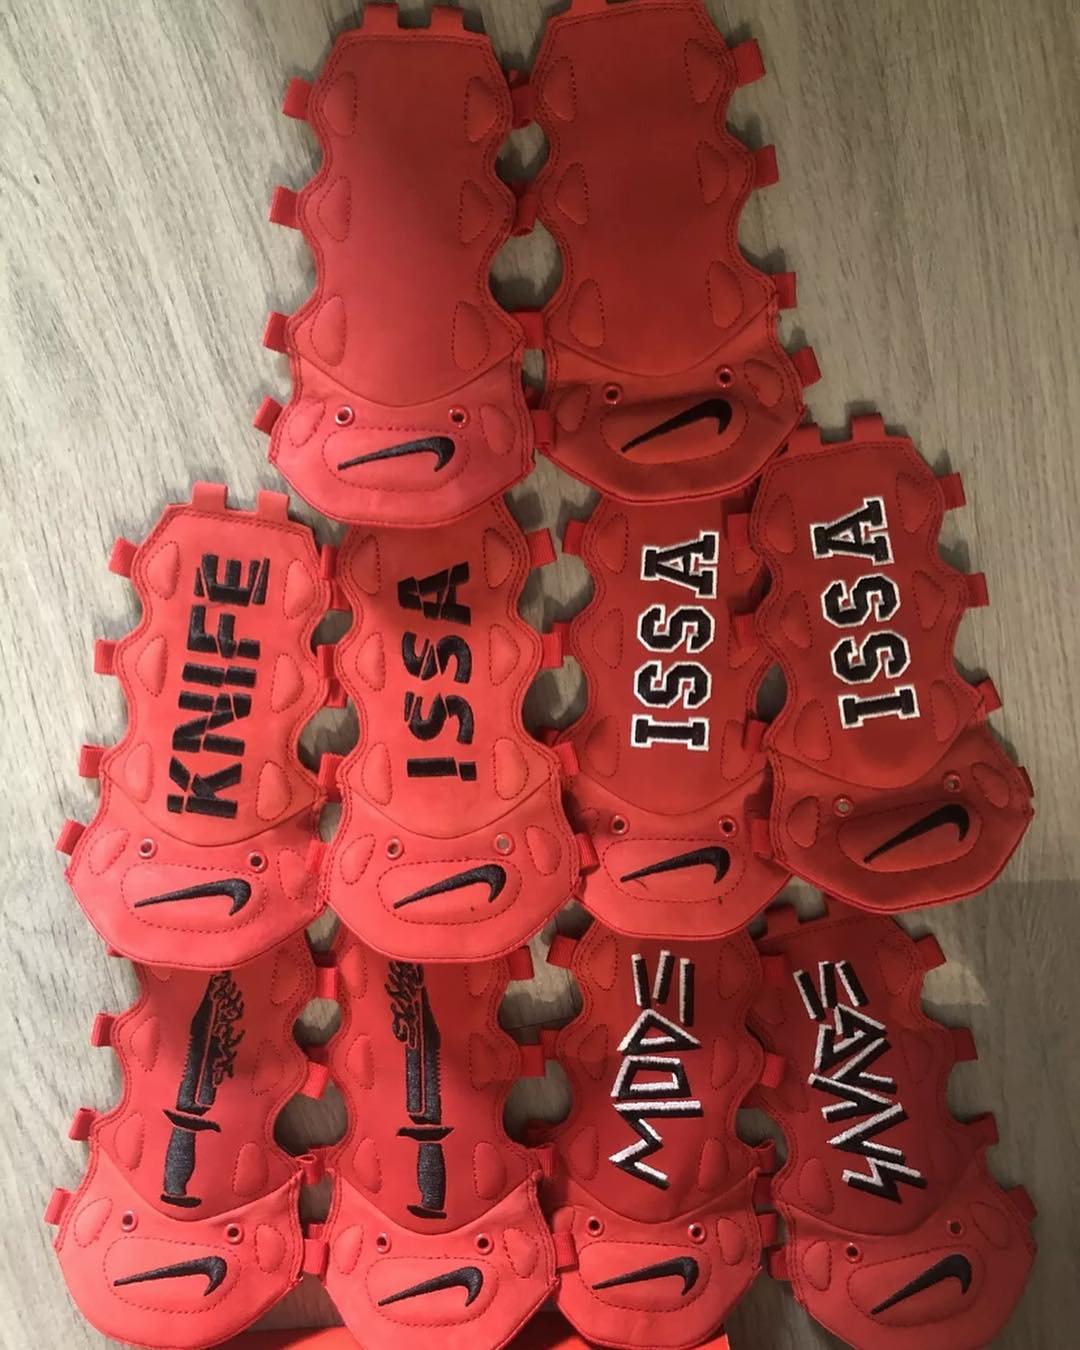 21 Savage x Nike Air More Money 'Issa' Images | Sole Collector